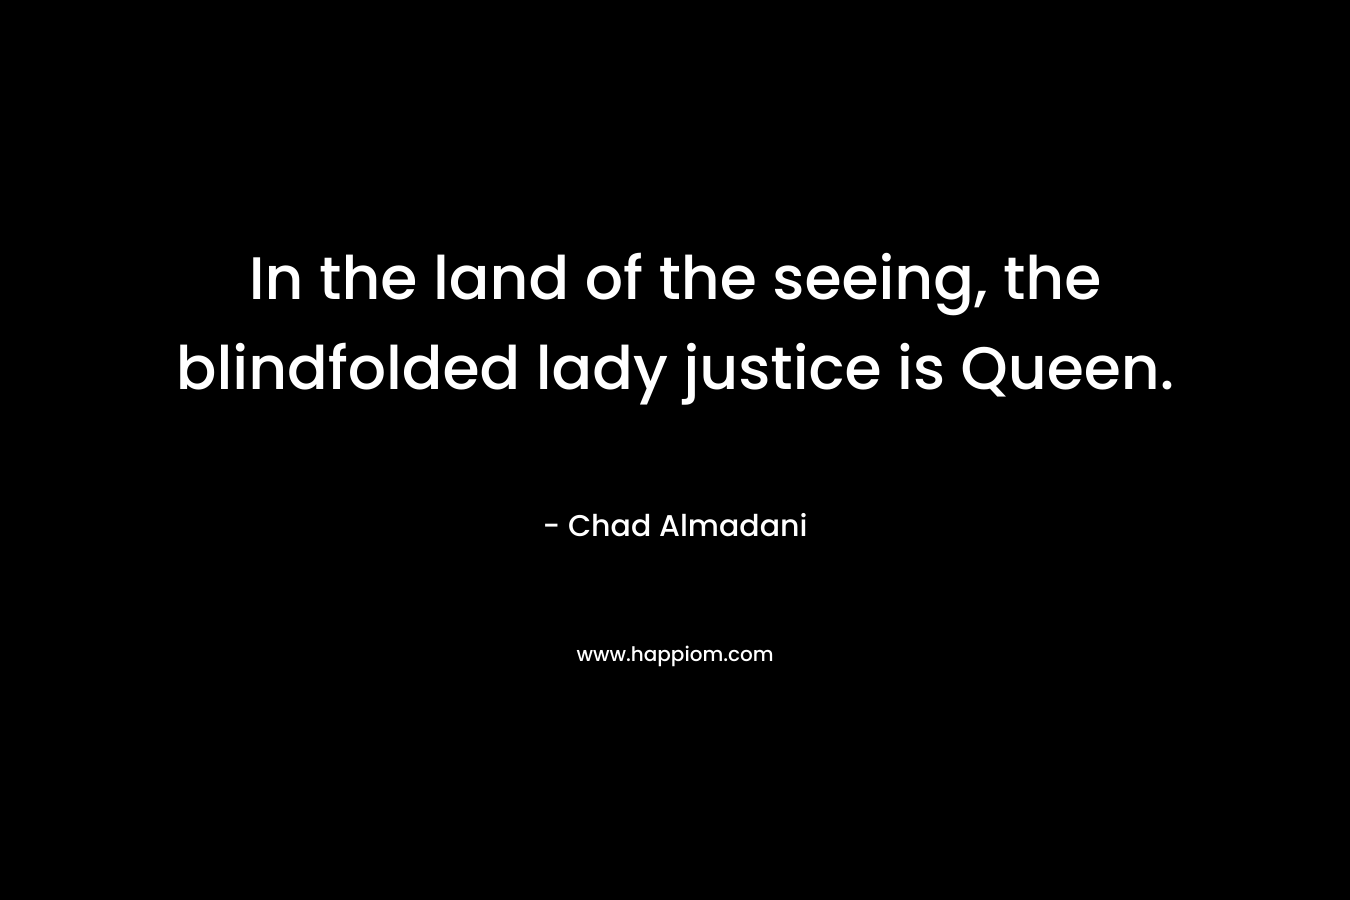 In the land of the seeing, the blindfolded lady justice is Queen.